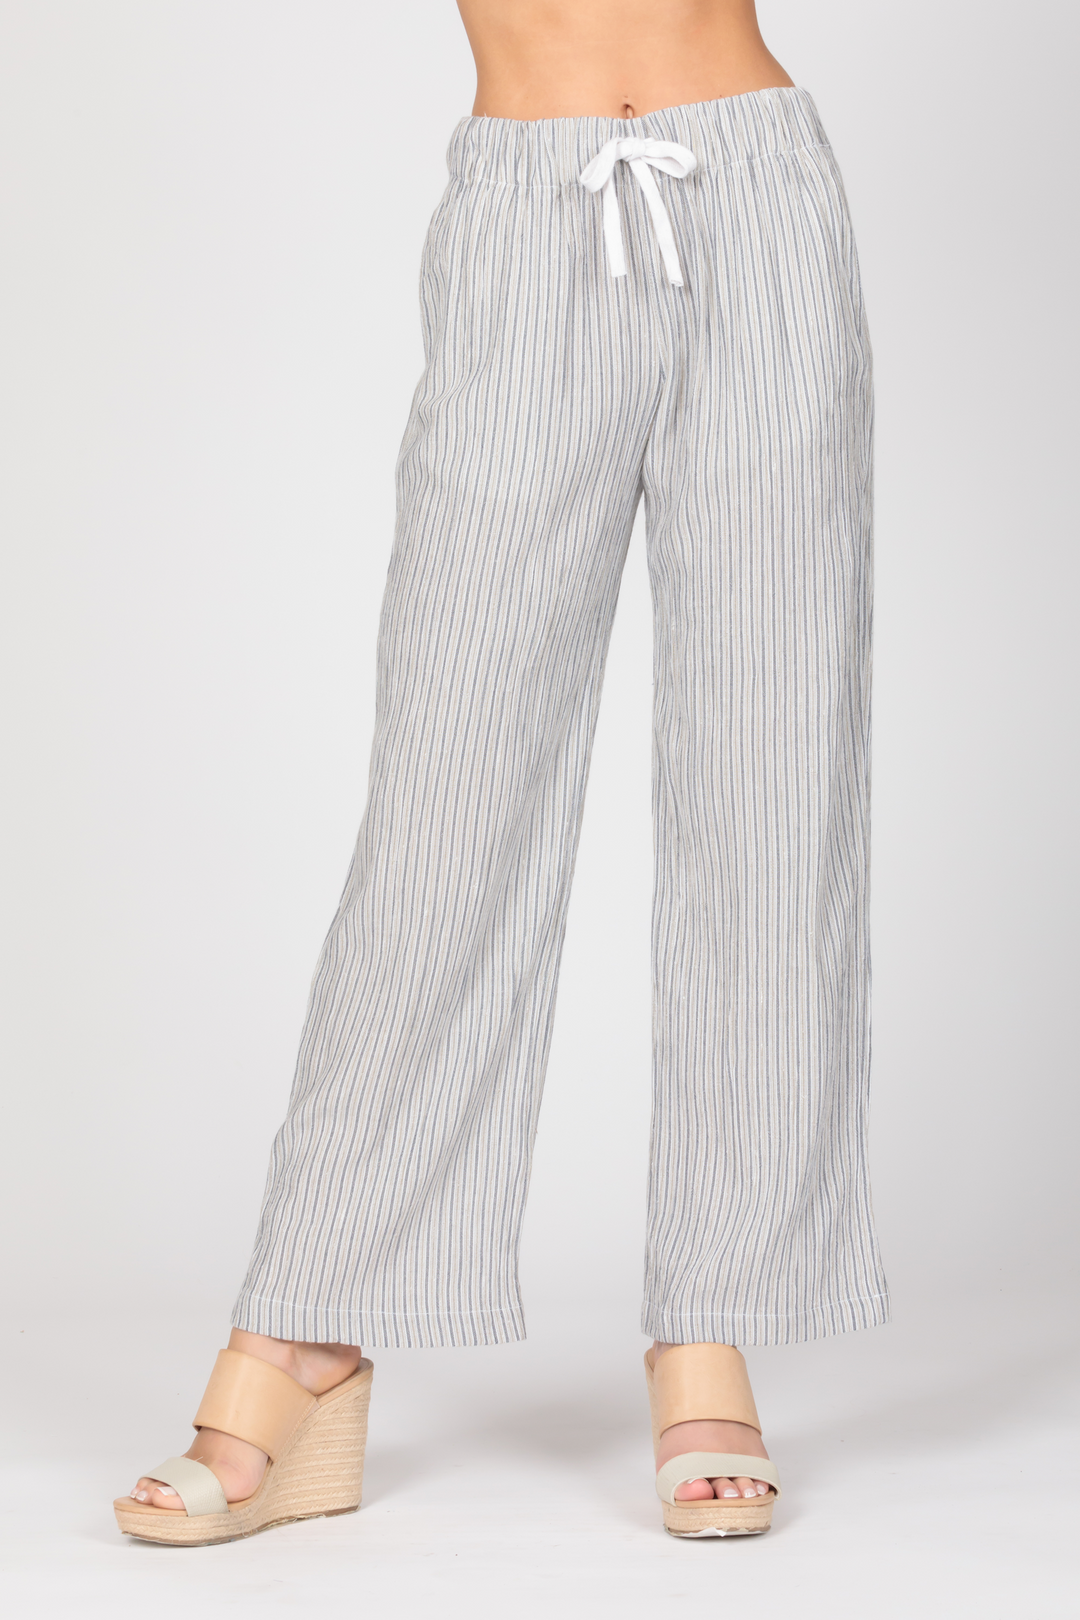 DRAWSTRING PANTS - BLUE/TAUPE - Kingfisher Road - Online Boutique